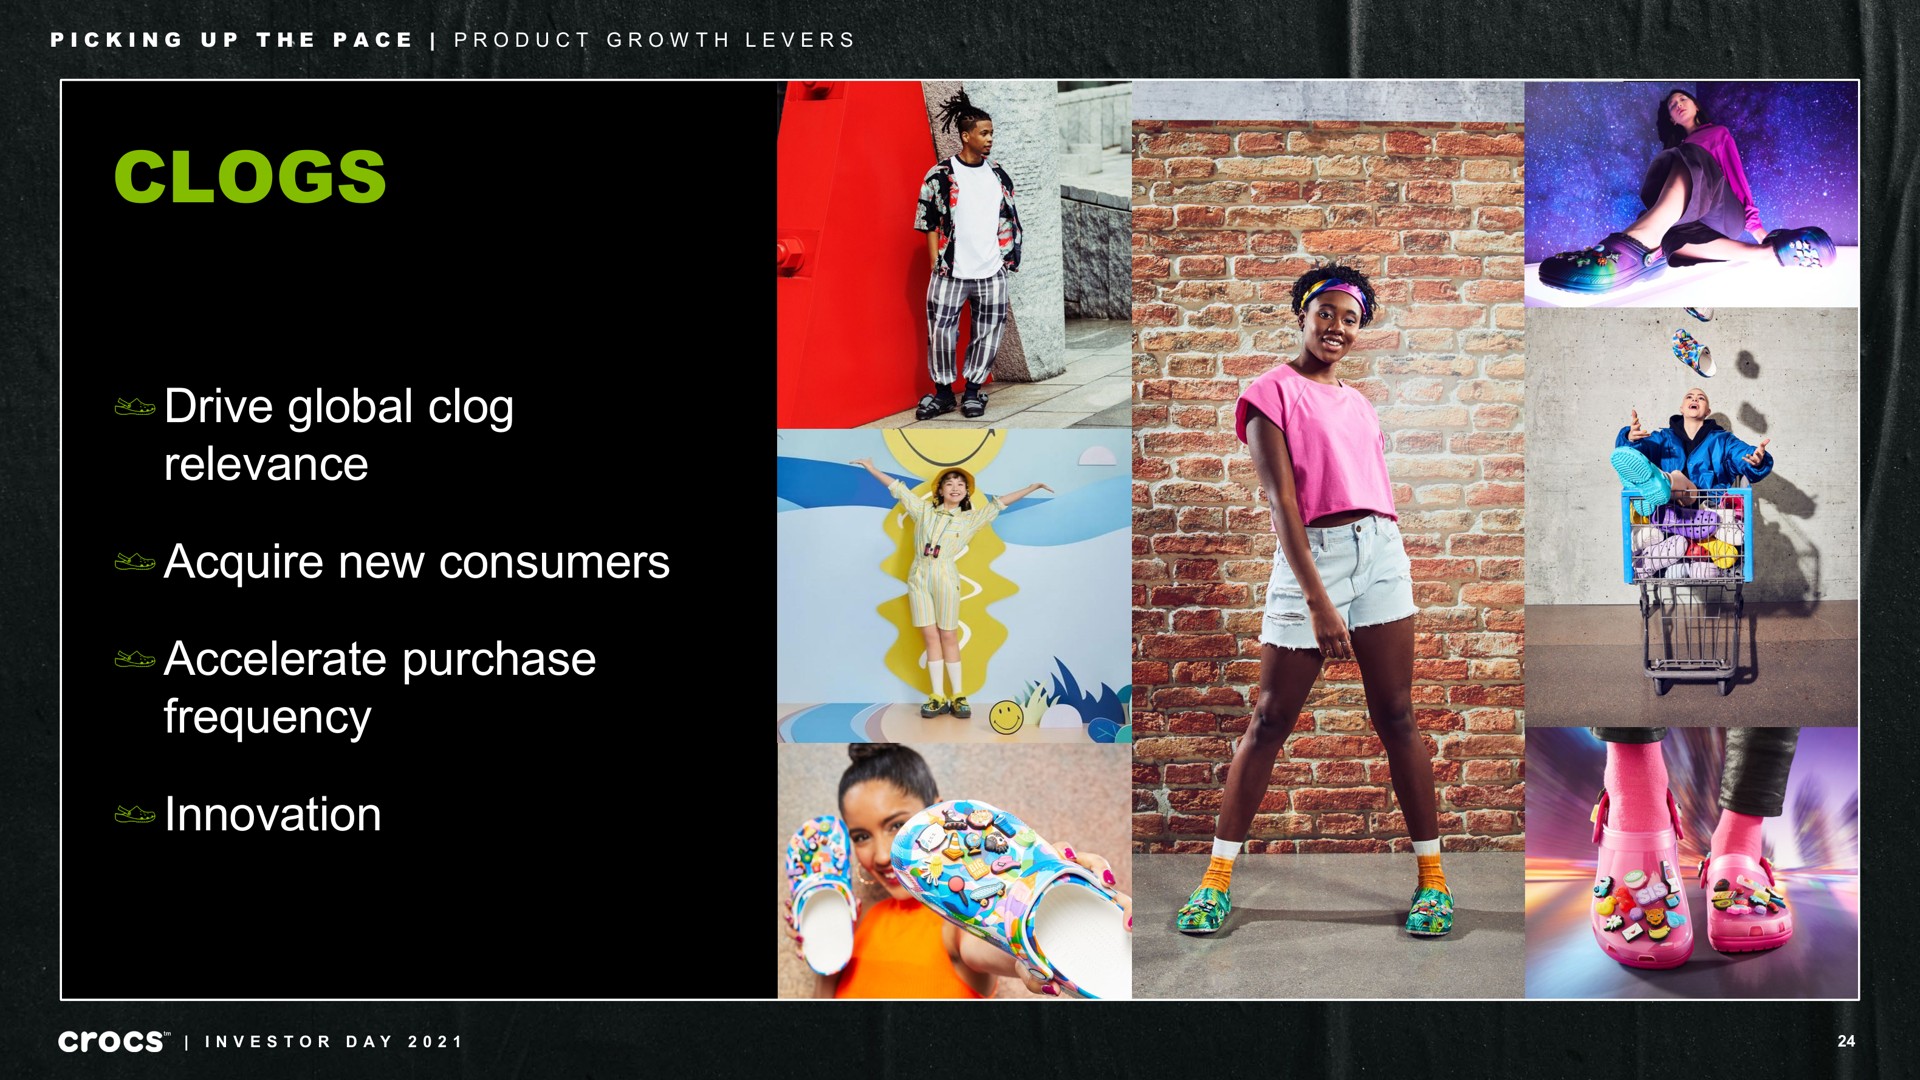 clogs drive global clog relevance acquire new consumers accelerate purchase frequency innovation picking up the pace product growth levers investor day | Crocs